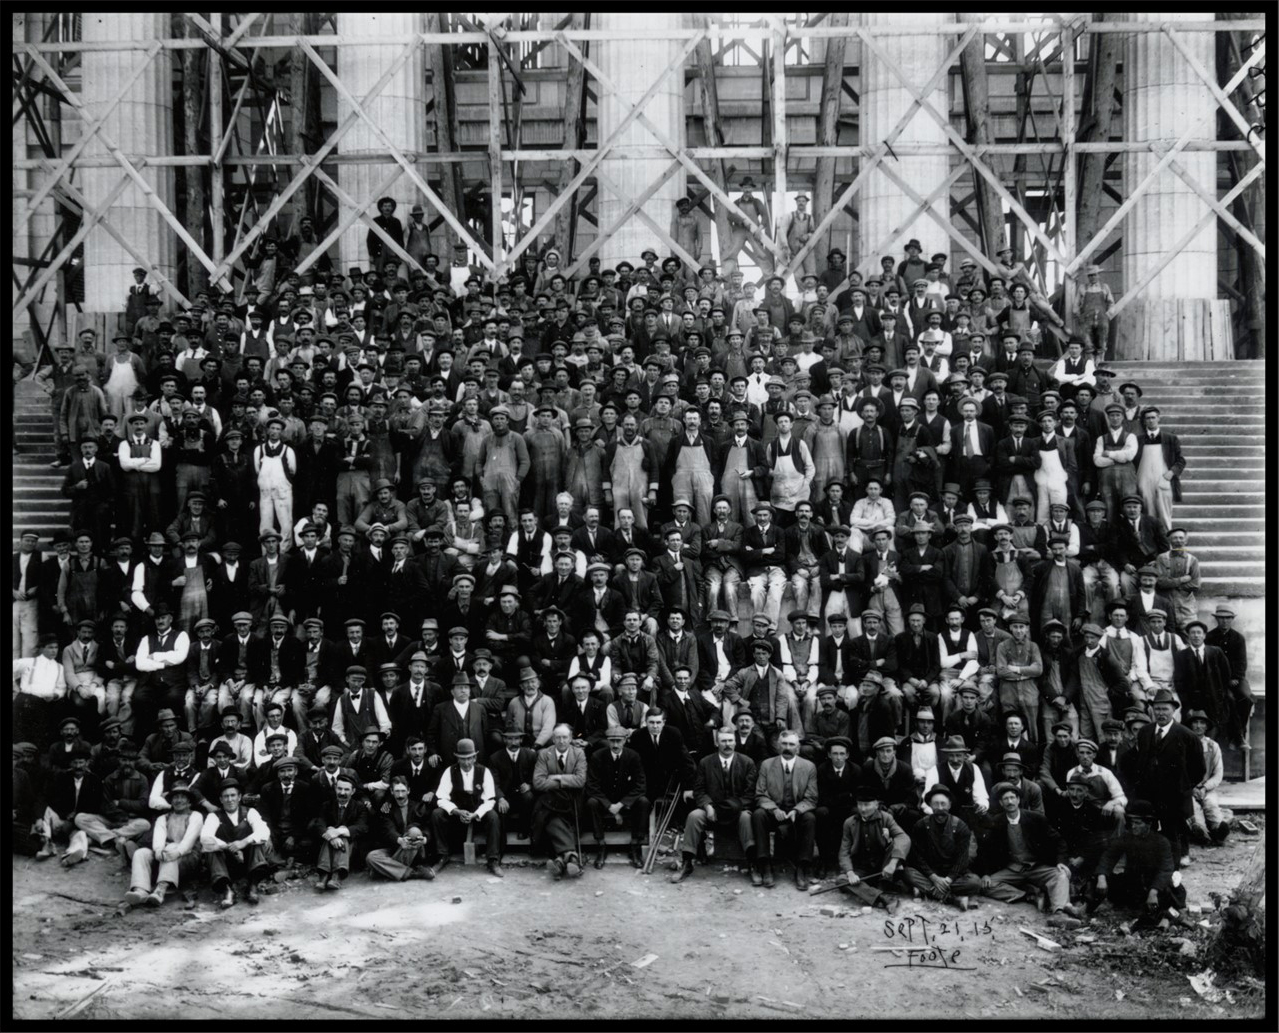 Photo of hundreds of men involved in the construction of the Legislative Building. They are standing or sitting on the steps of the building, which is still under construction.